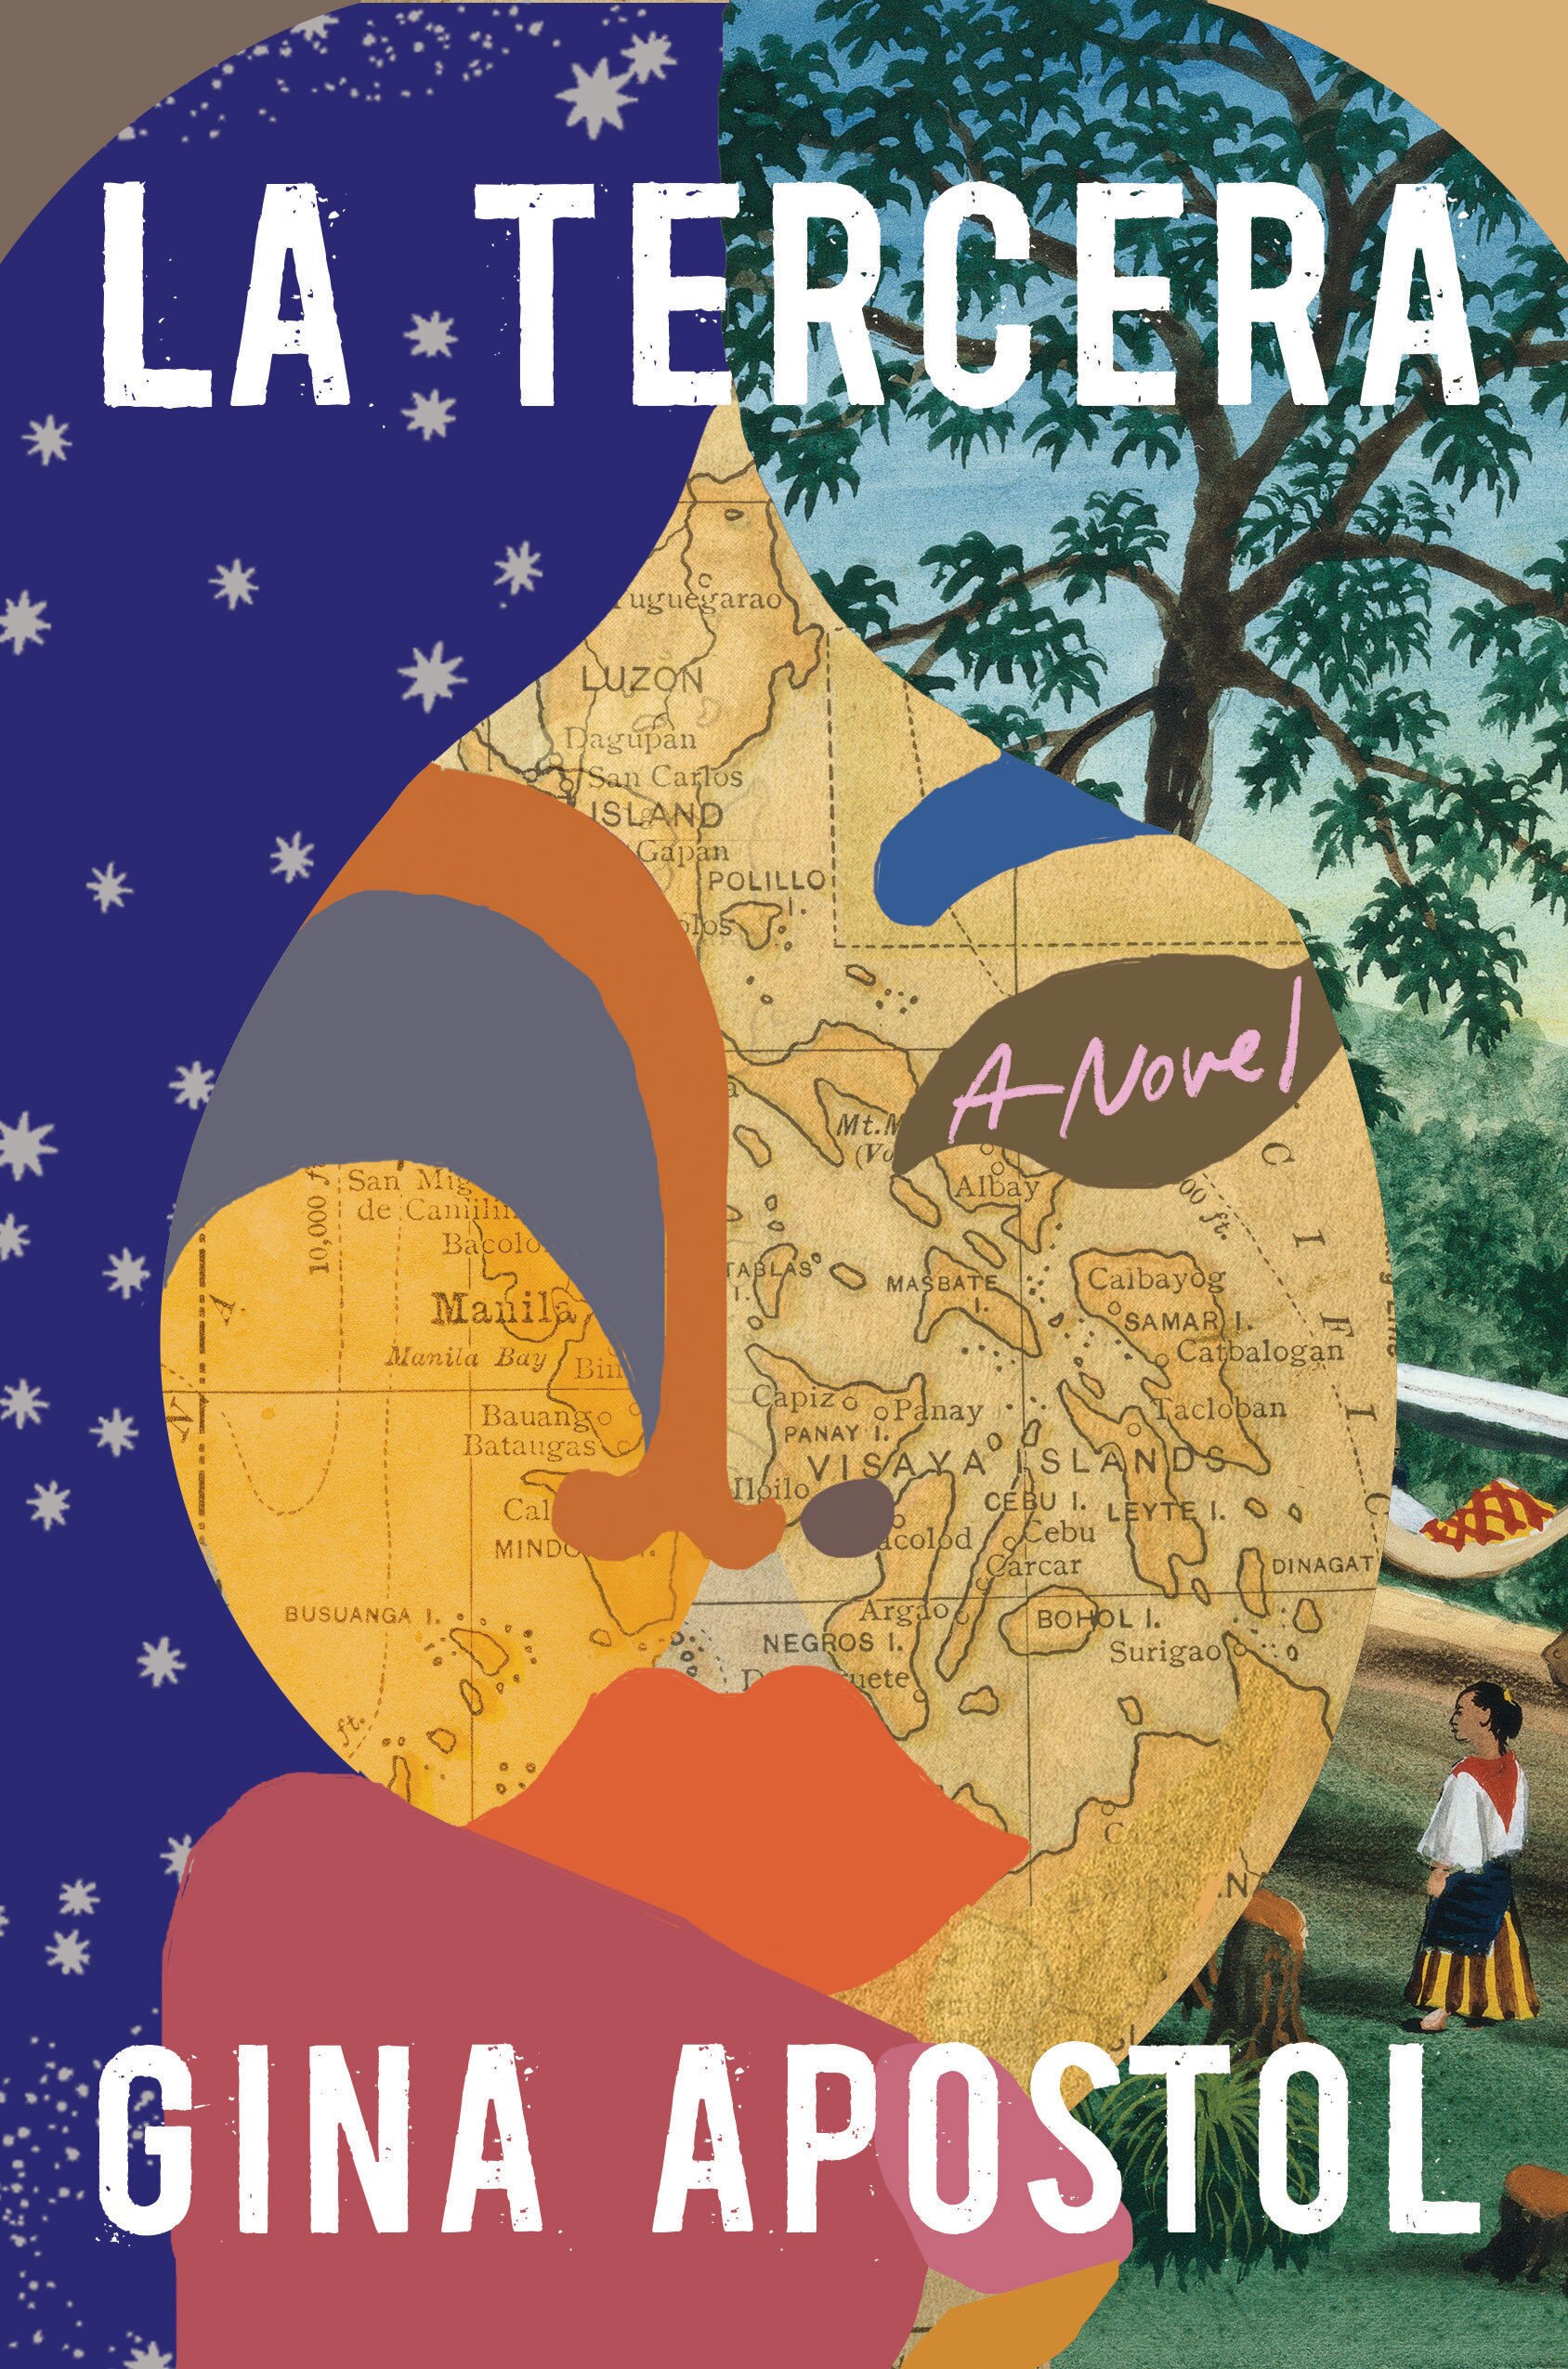 A book cover showing a stylised illustration of a woman's face comprised of a map, an outdoor scene and a nightsky